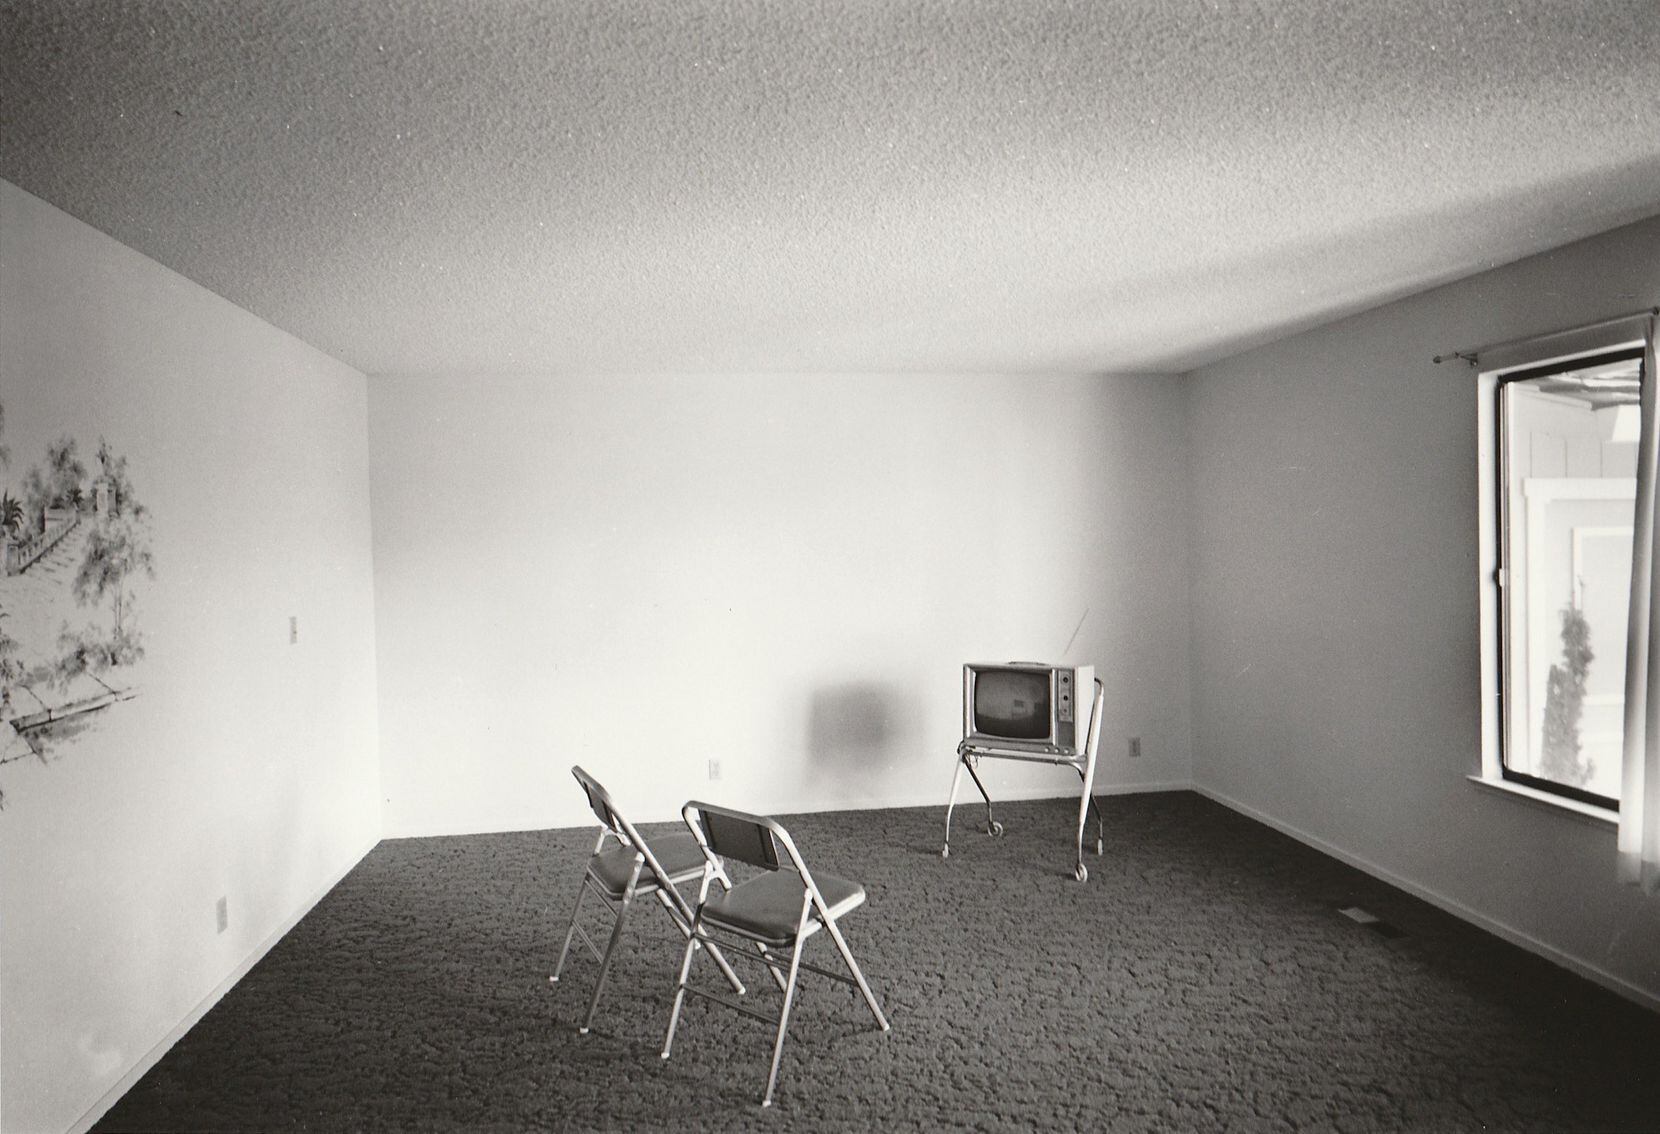 Bill Owens' "Empty room with 2 chairs" captures the transitory nature of suburban living for...